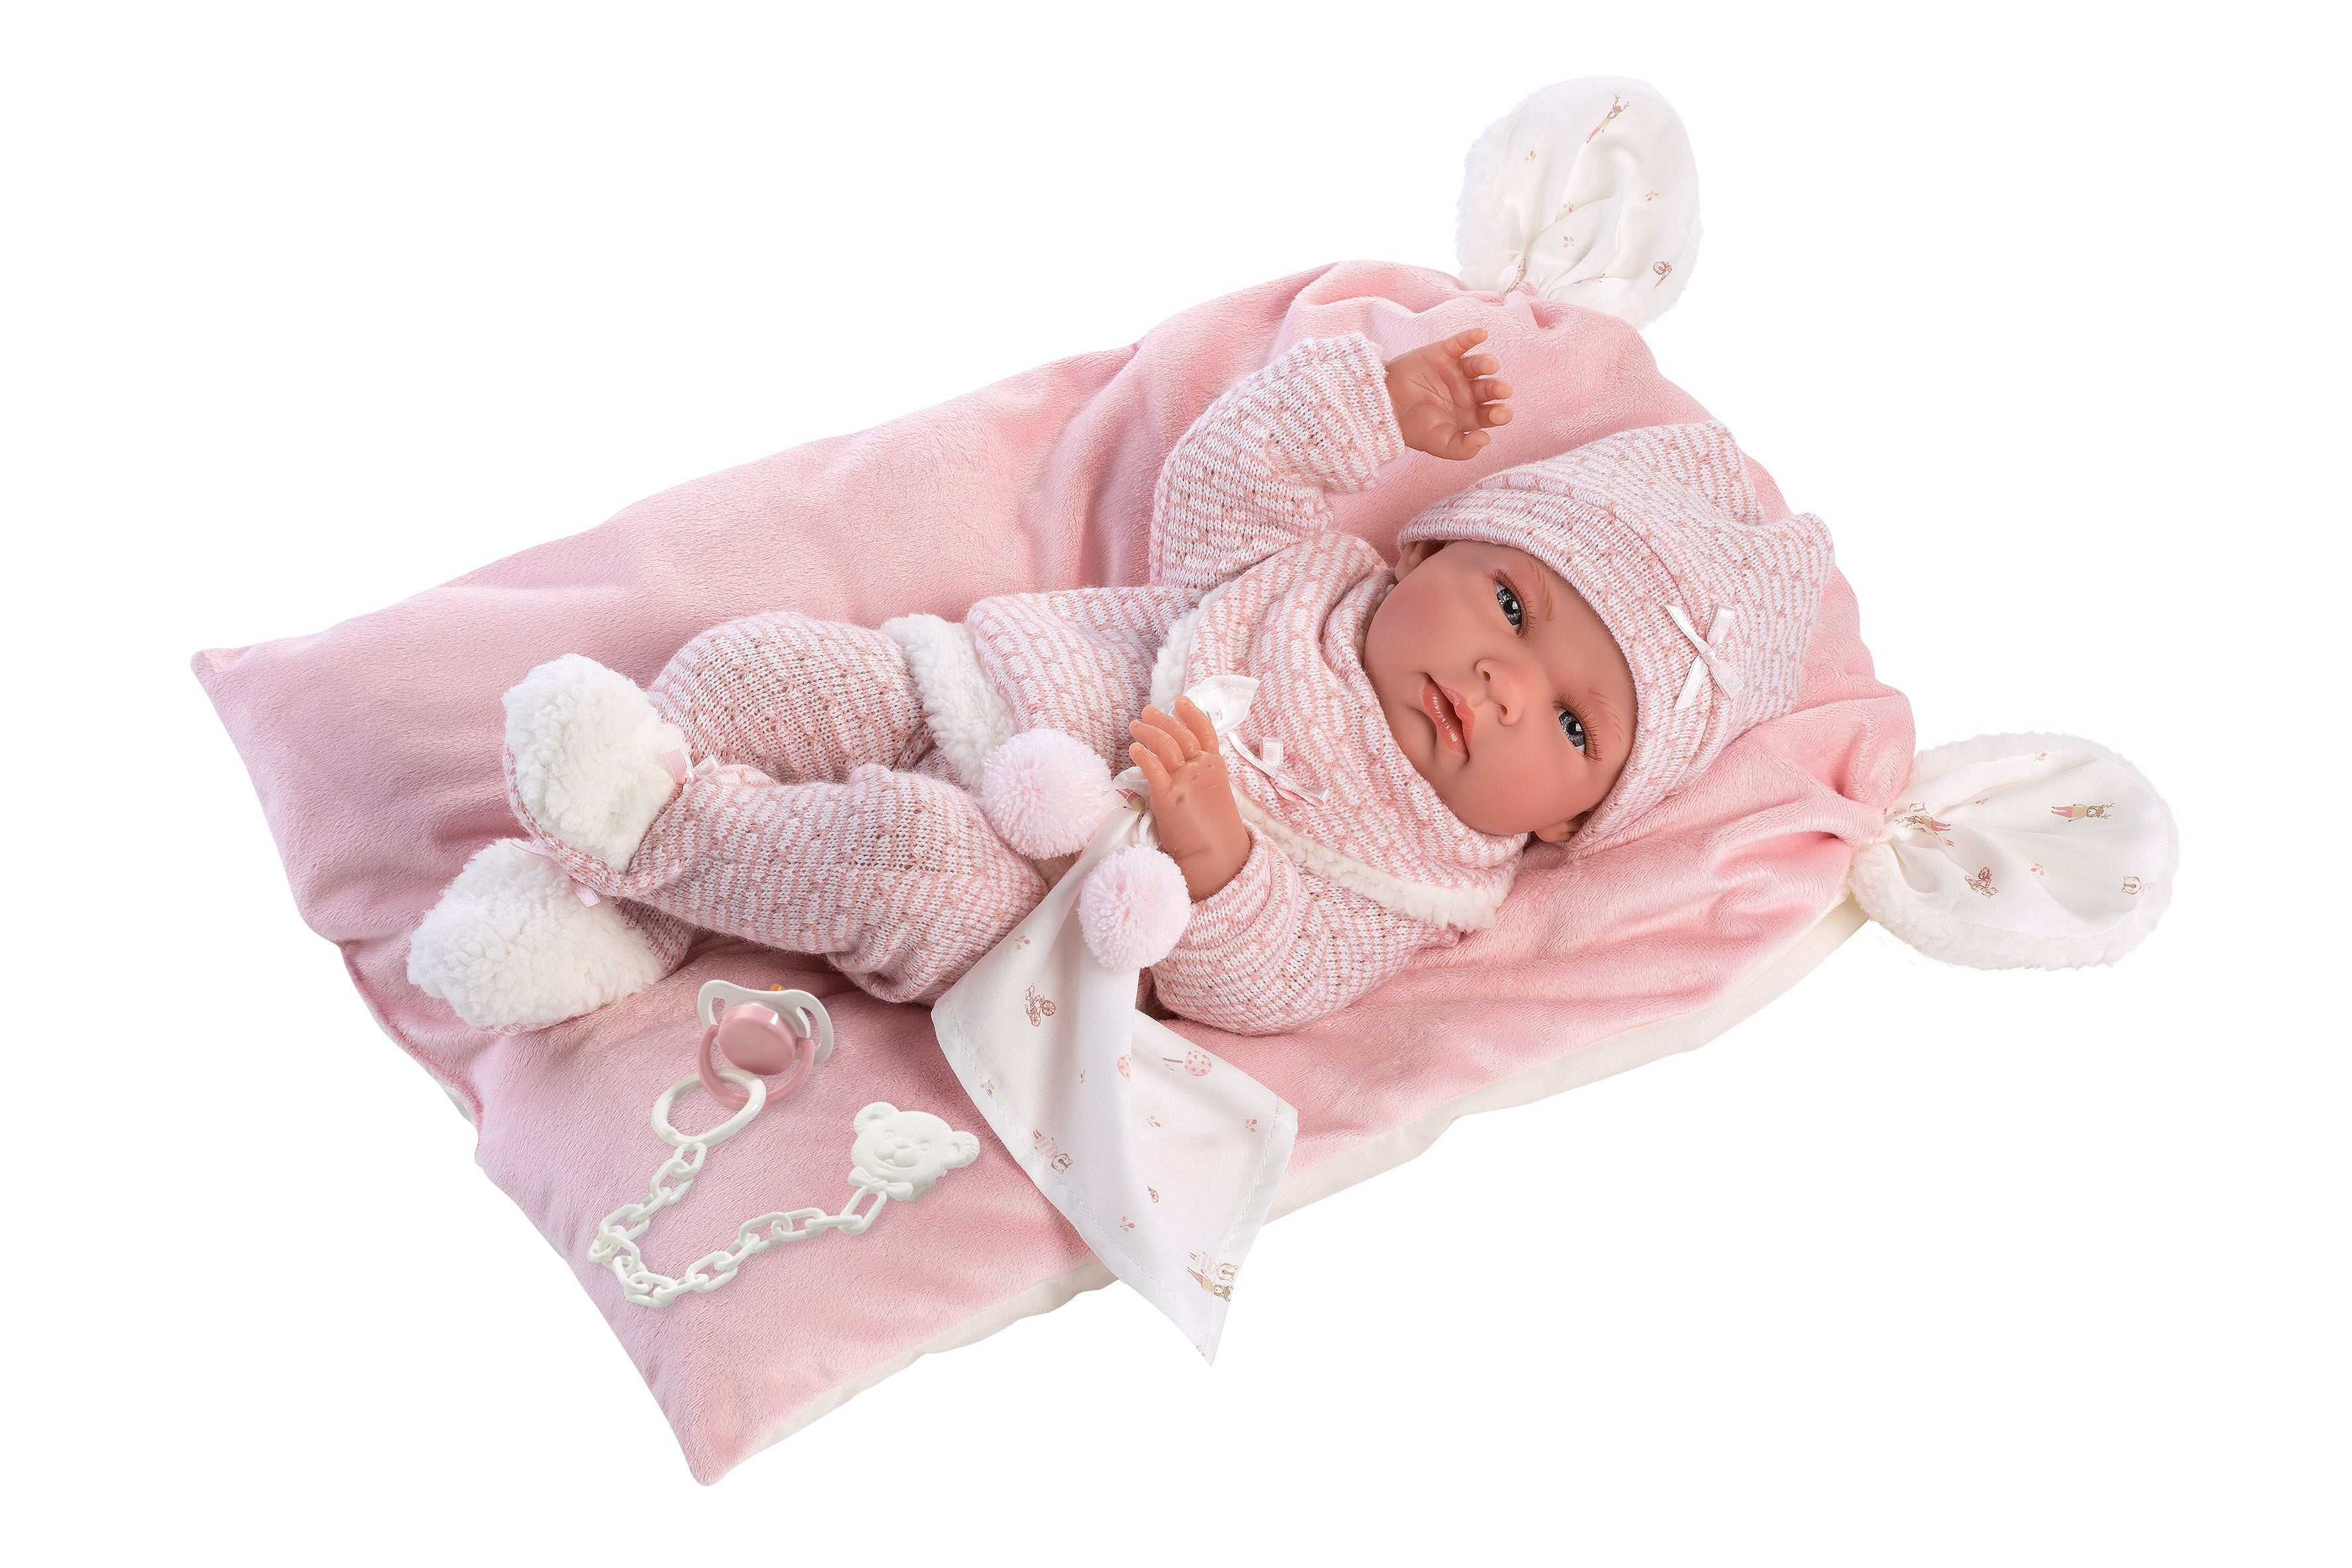 Llorens 15.7" Anatomically-correct Baby Doll Naomi with Blanket Dolls